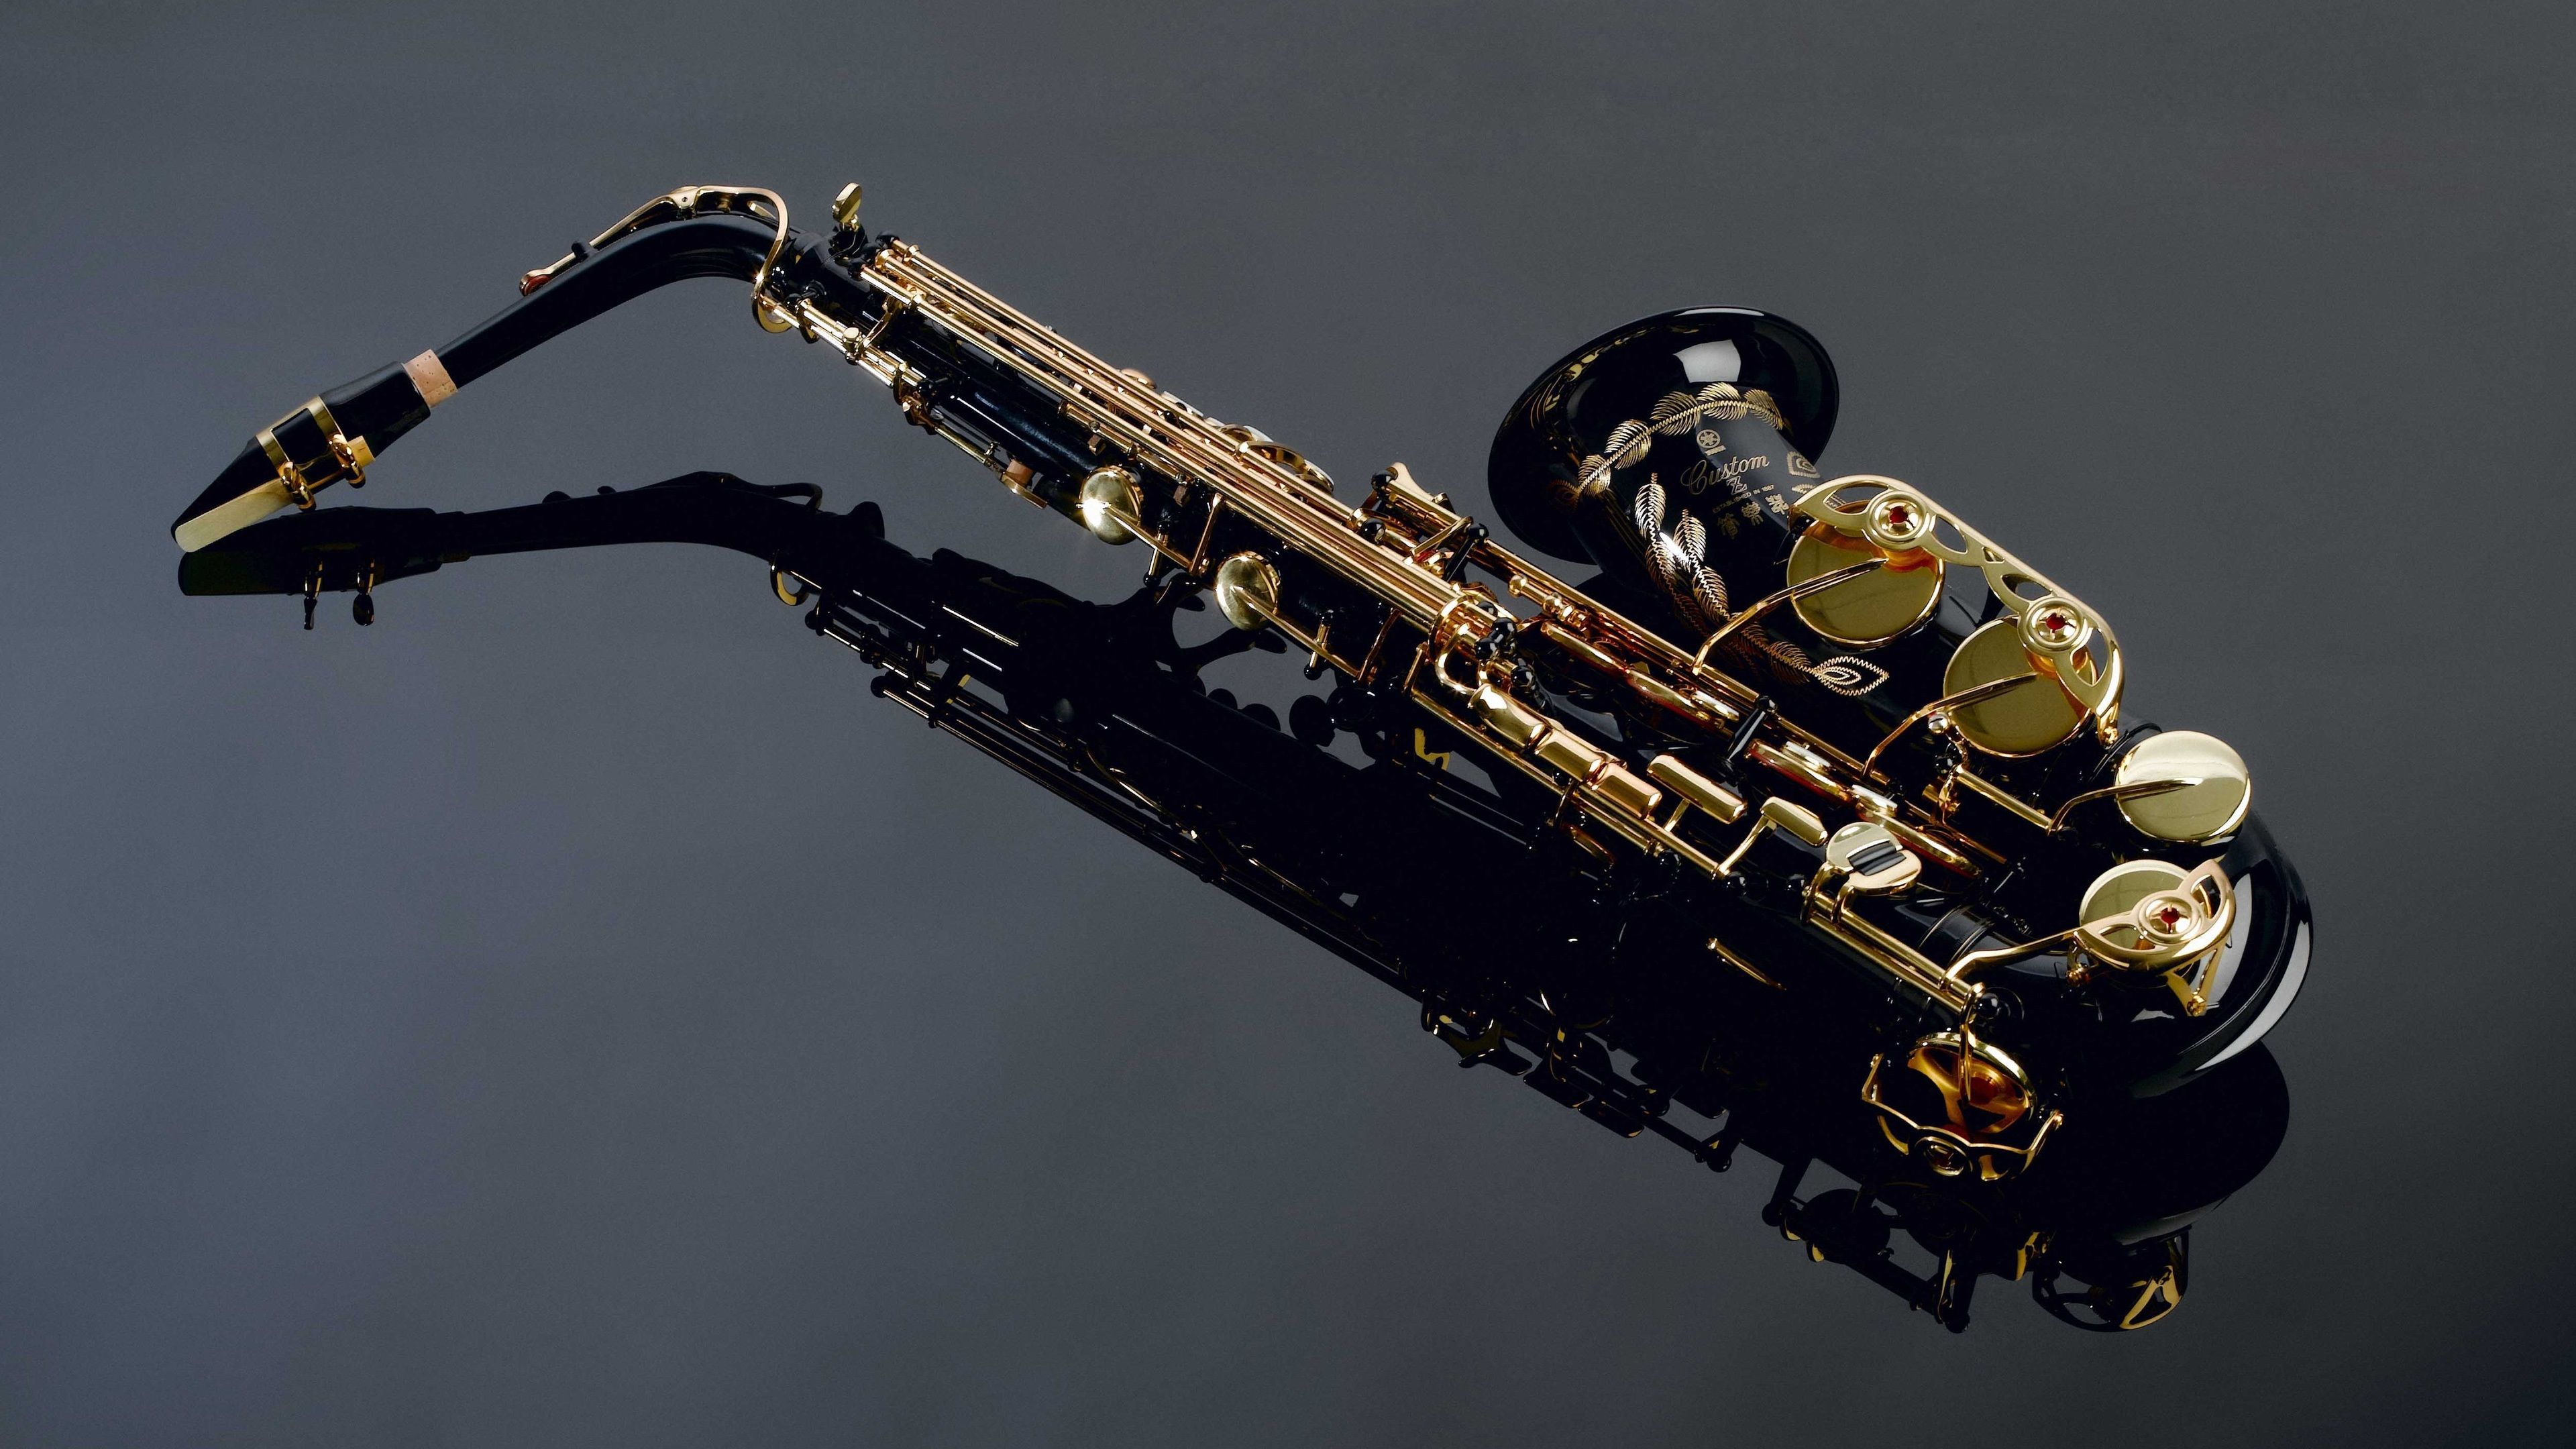 Wallpaper Musical instruments, saxophone 3840x2160 UHD 4K Picture, Image